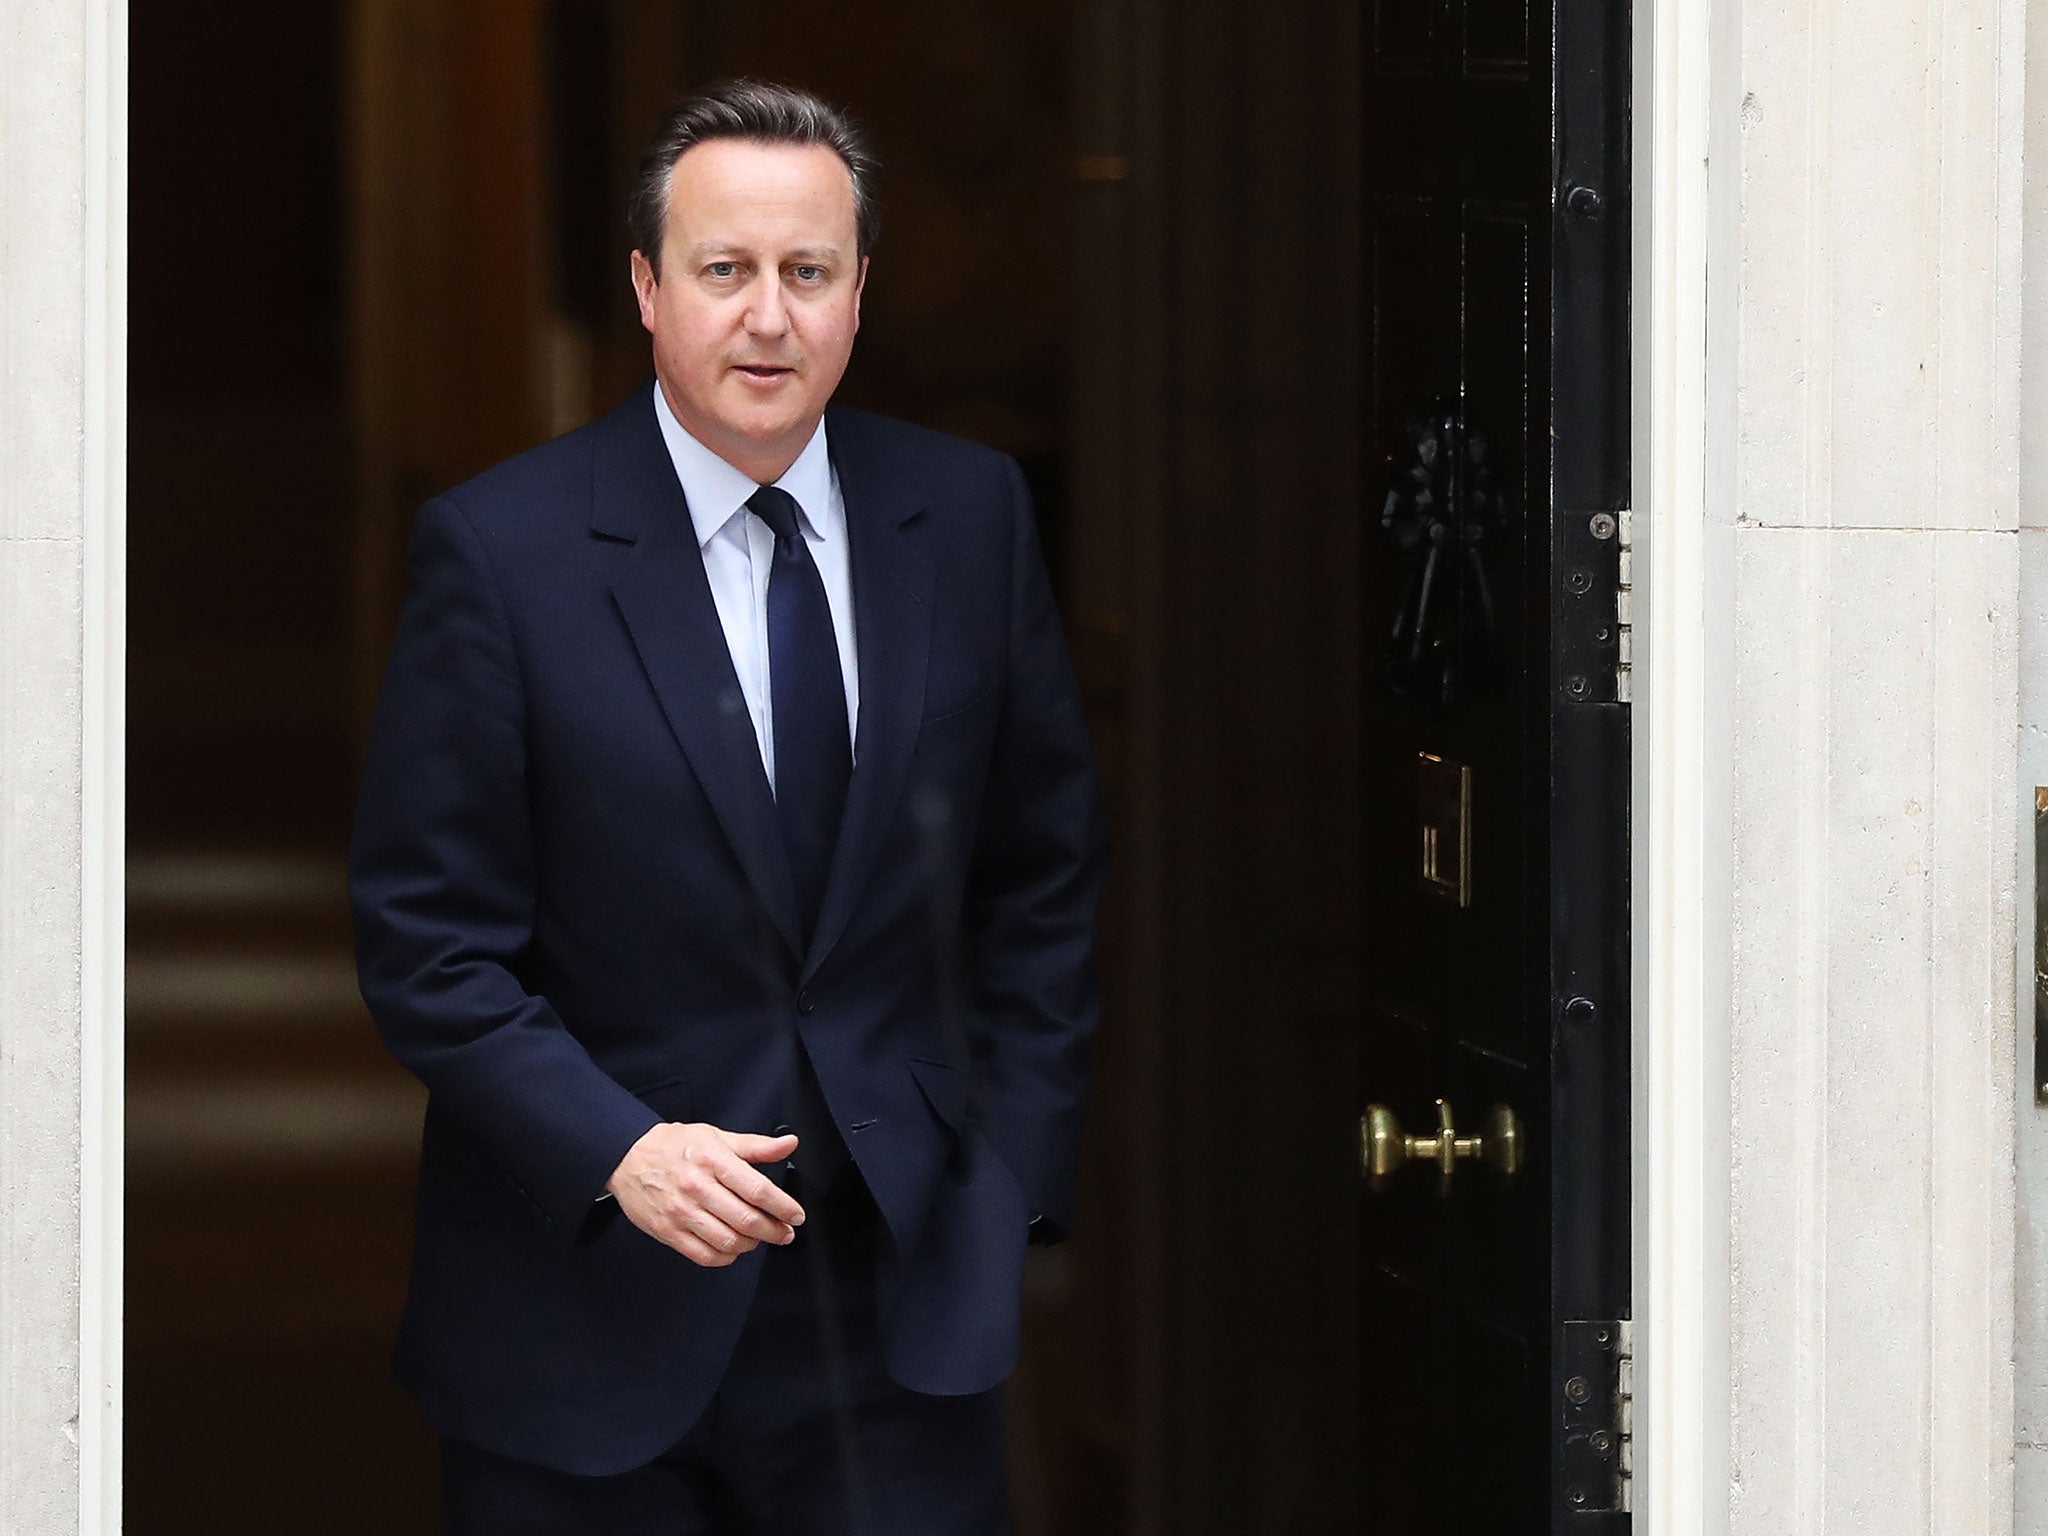 Today’s session will be Mr Cameron’s final appearance at a Brussels summit